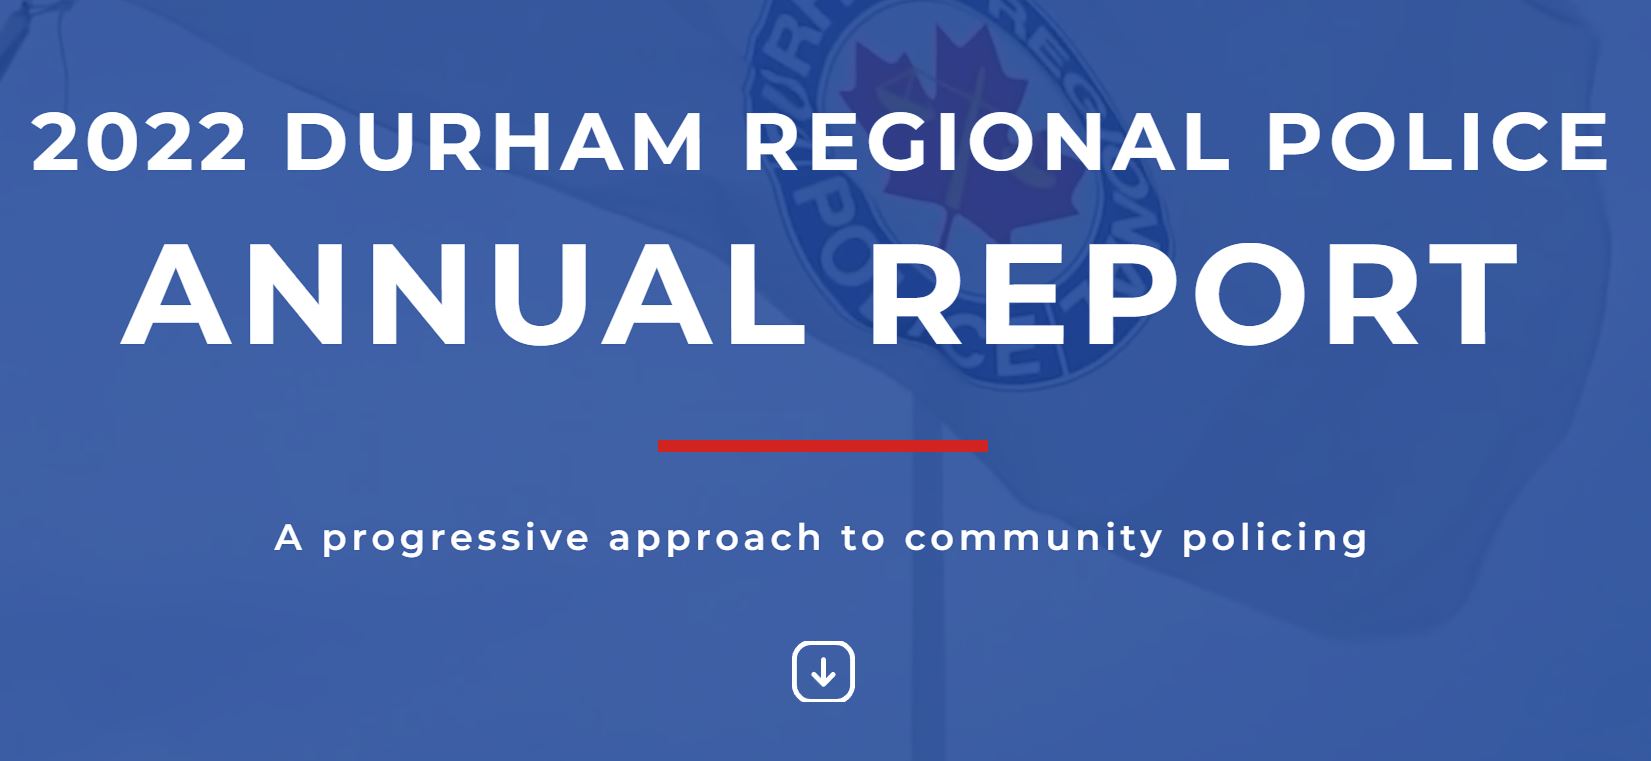 Annual Reports & Business Plans | Durham Regional Police Services Board